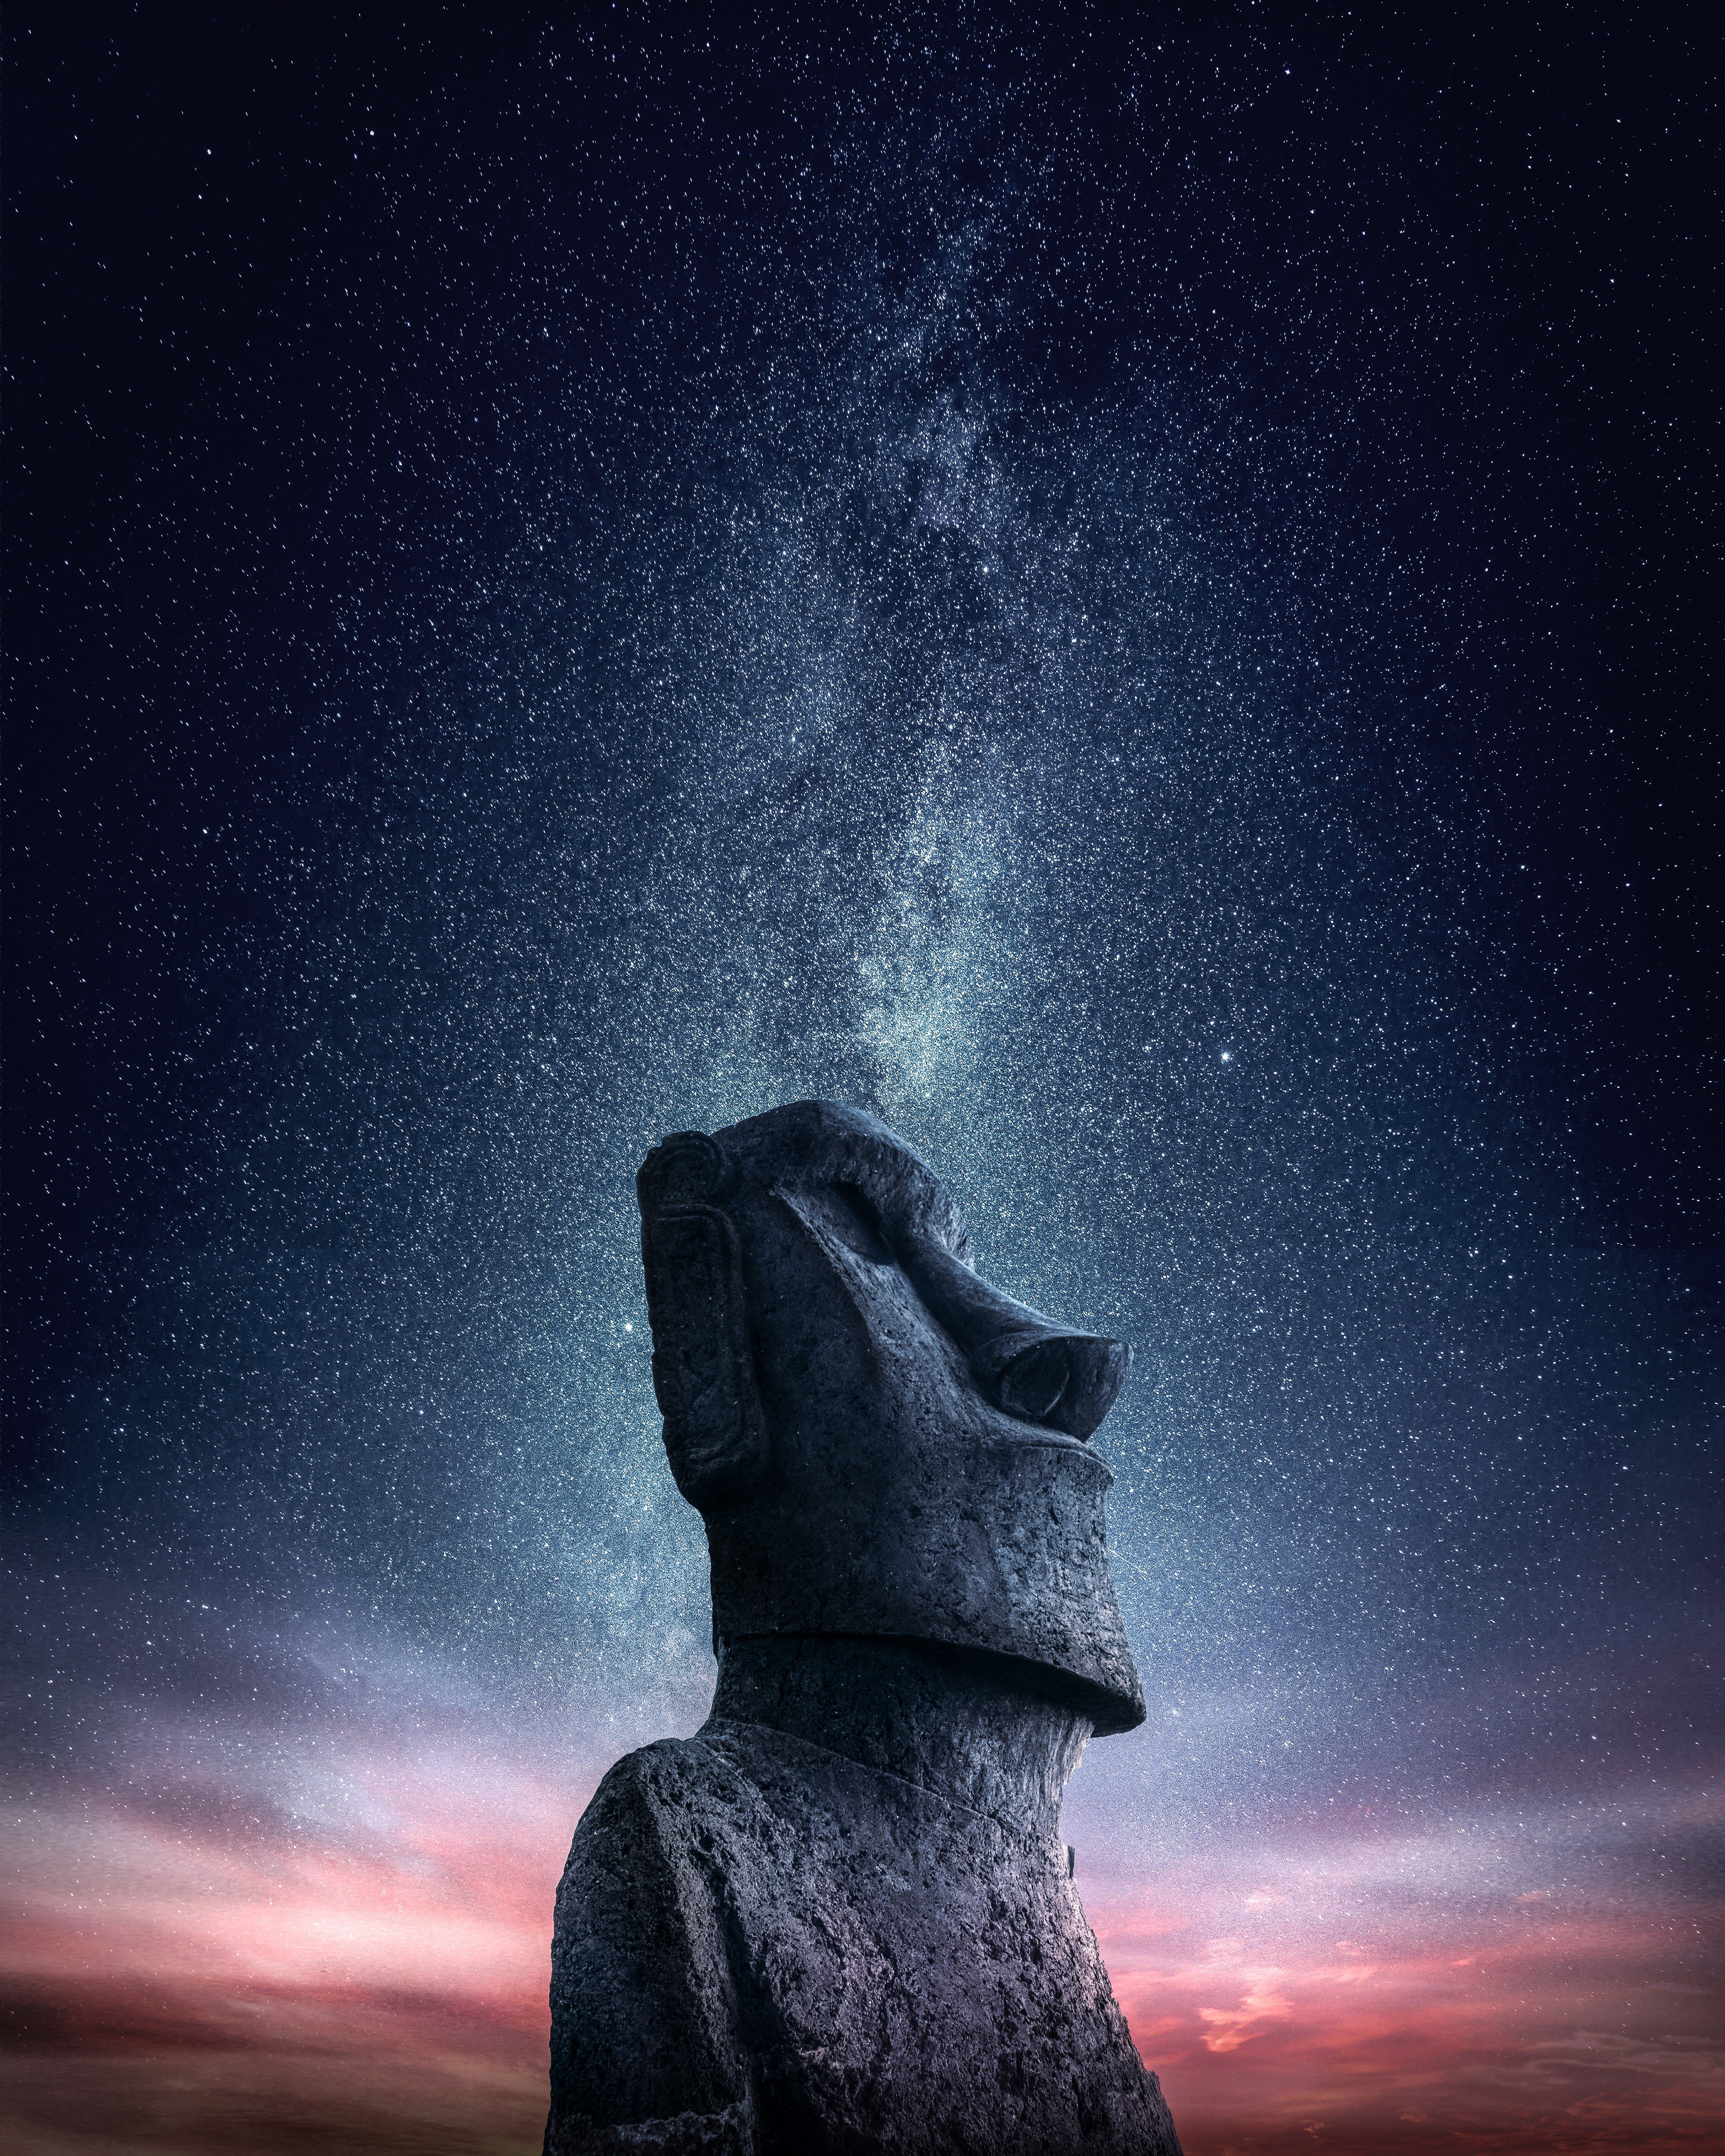 miscellaneous, easter straits, moai, miscellanea, starry sky, statue, idol, easter strow images